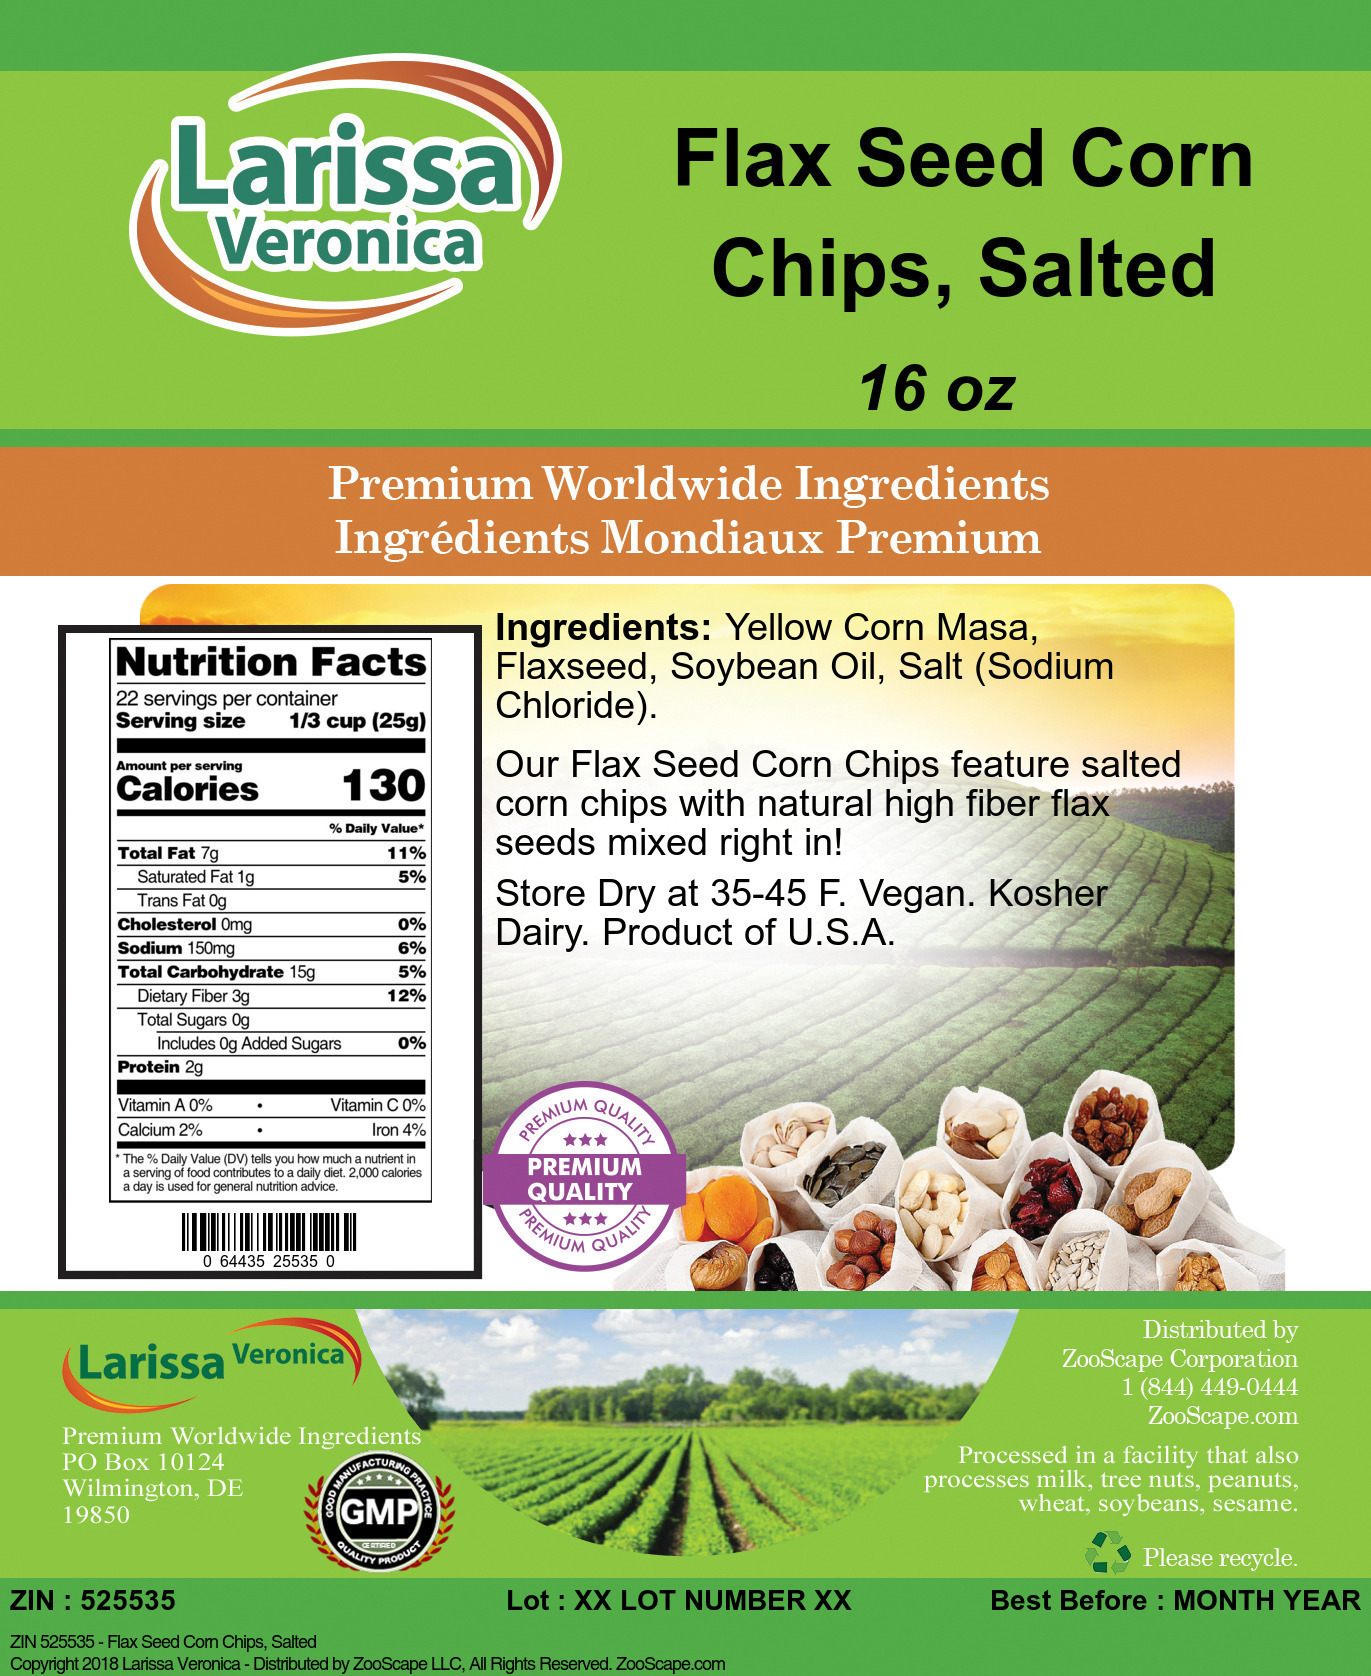 Flax Seed Corn Chips, Salted - Label